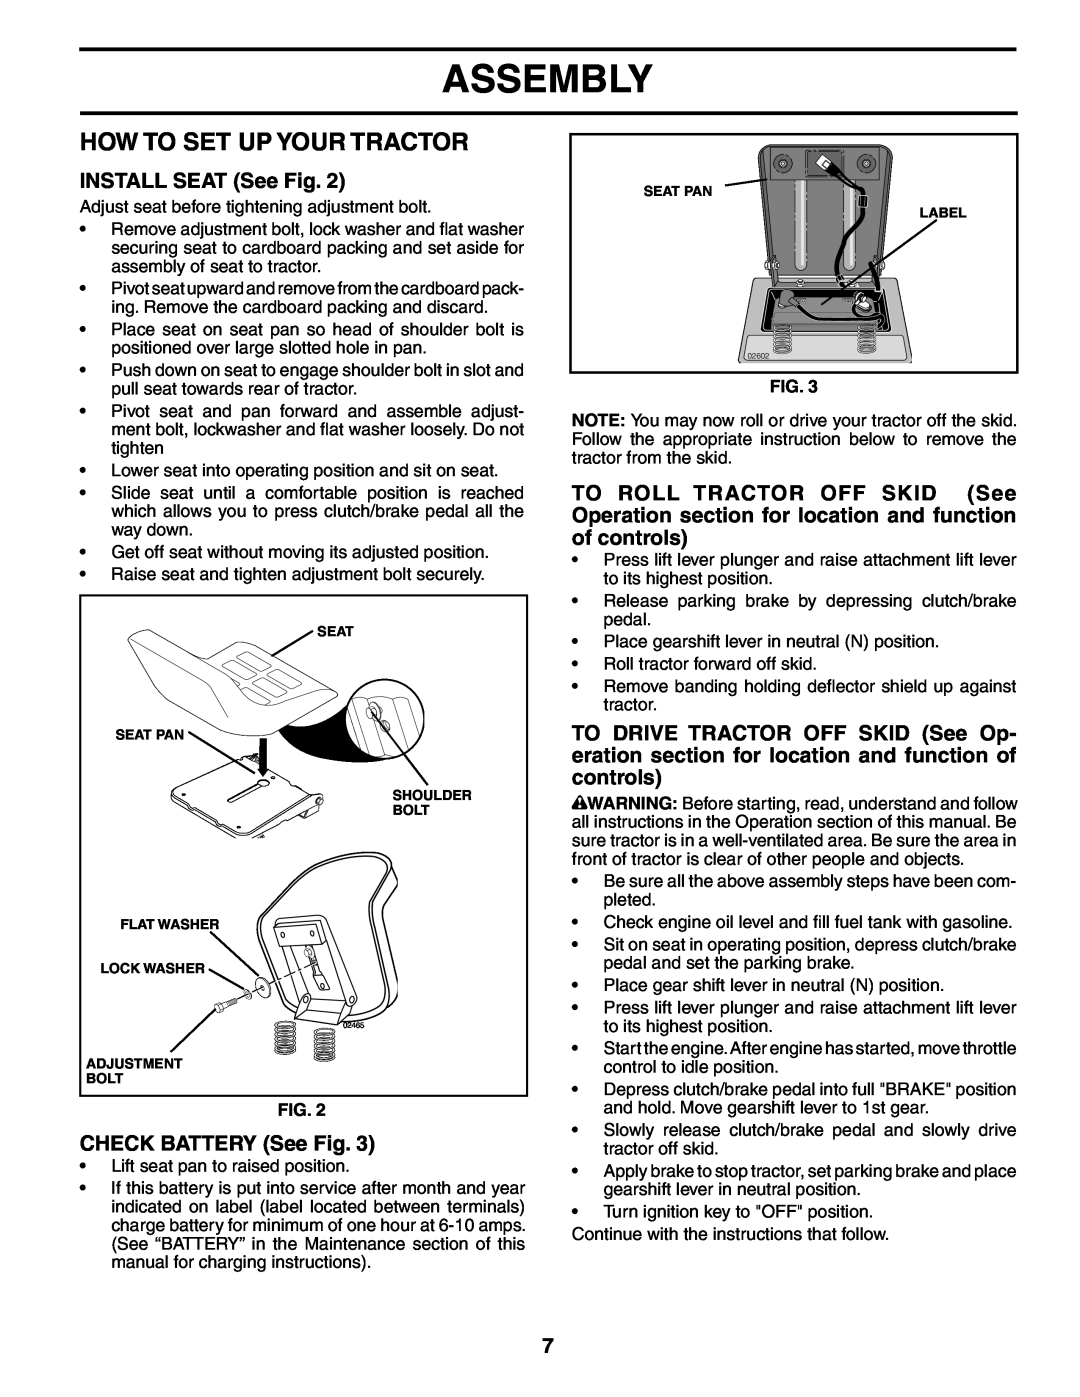 Poulan 188695 manual How To Set Up Your Tractor, INSTALL SEAT See Fig, CHECK BATTERY See Fig, Assembly 